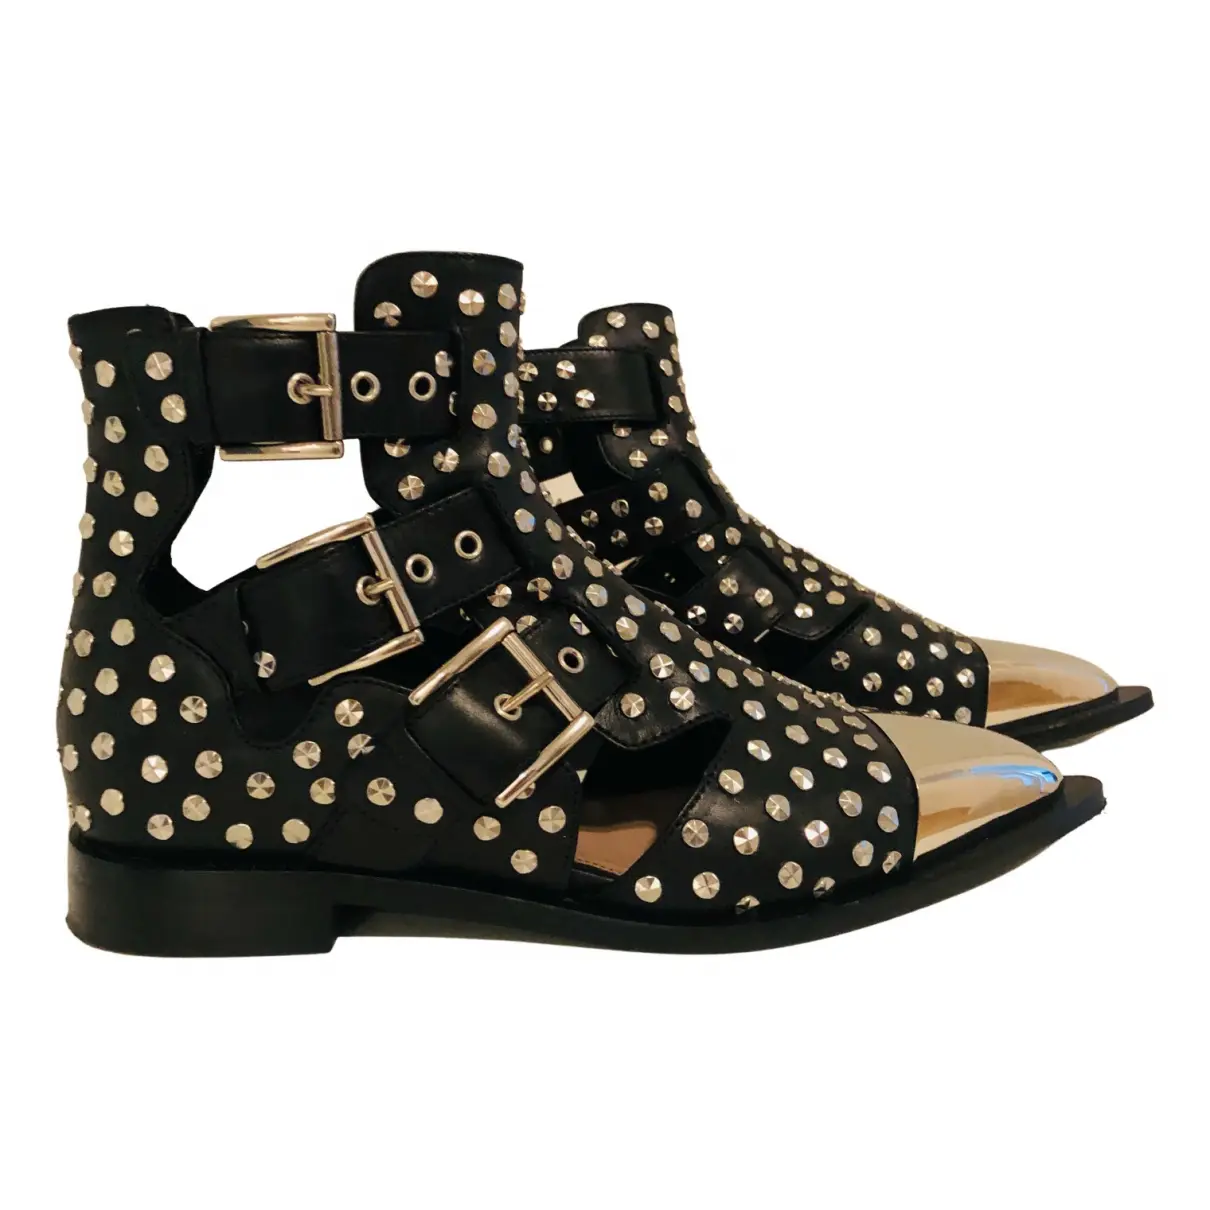 Leather buckled boots Alexander McQueen